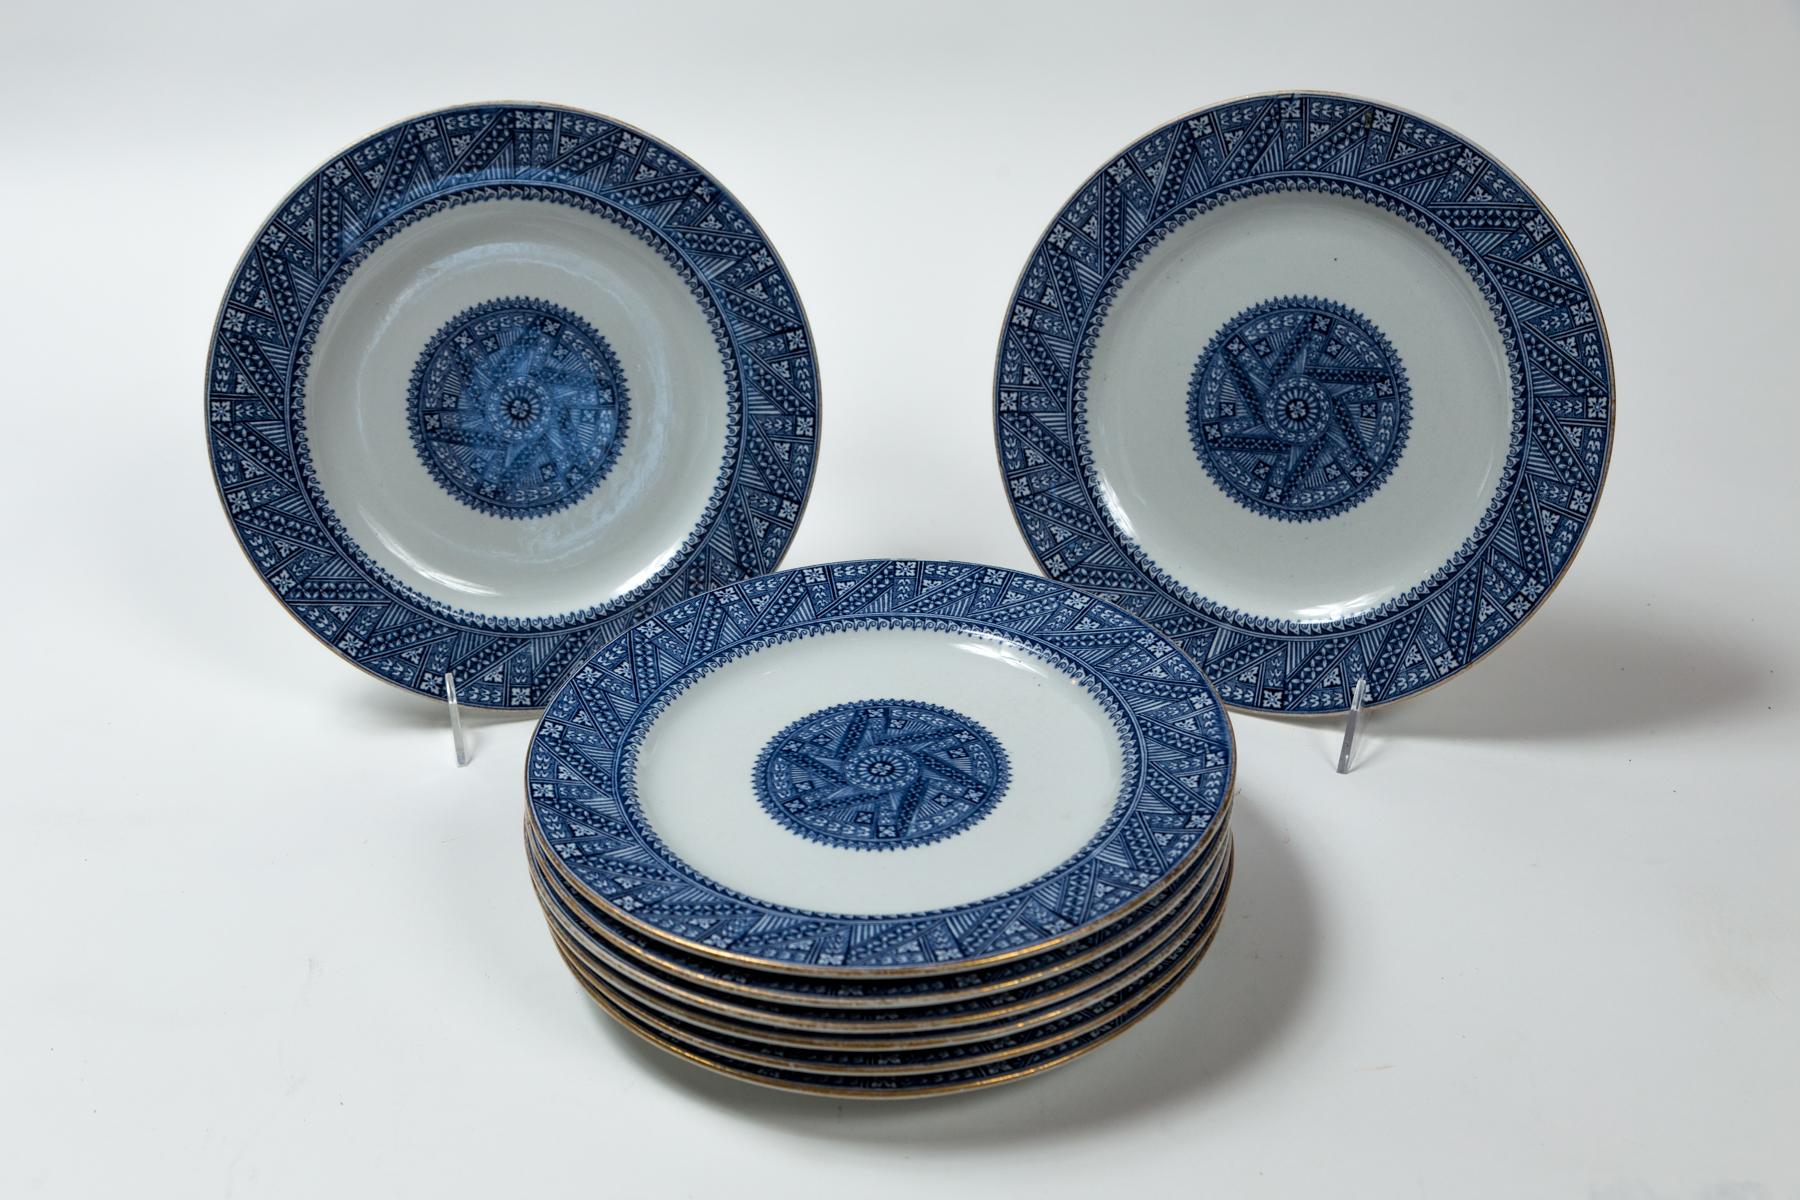 Set of 8 Royal Worcester Aesthetic Period Plates, 19th Century, England. A striking design in a blue and white pattern, banded with center medallion. Royal Worcester and date marks, as well as mark for Gilman Collamore & Co.
A luxury retail